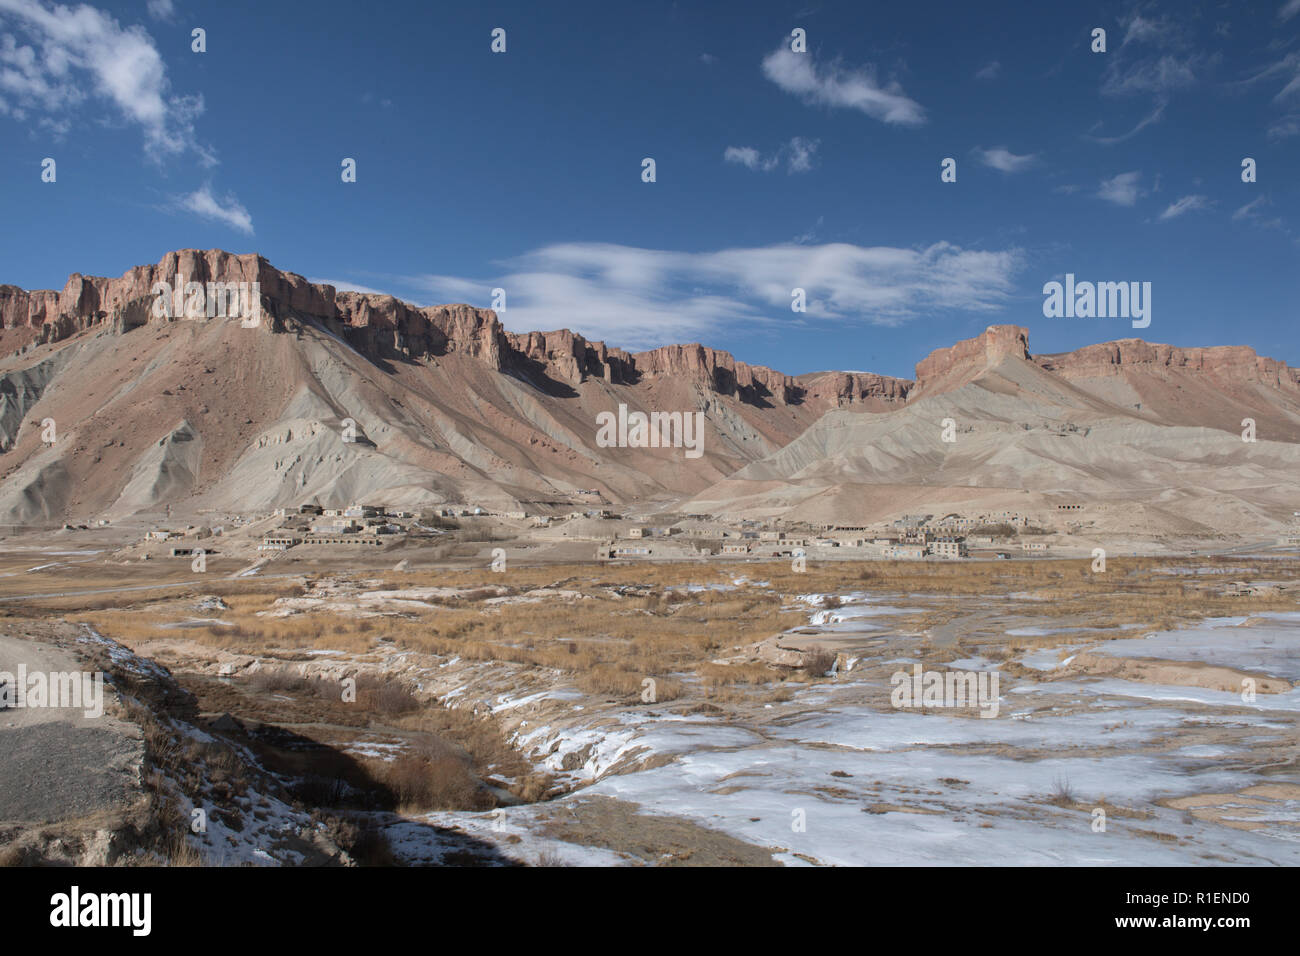 Village Near Band-e Amir Lake With Frozen Water And Mountains In The Background,  Band-e Amir National Park, Bamyan Province, Afghanistan Stock Photo